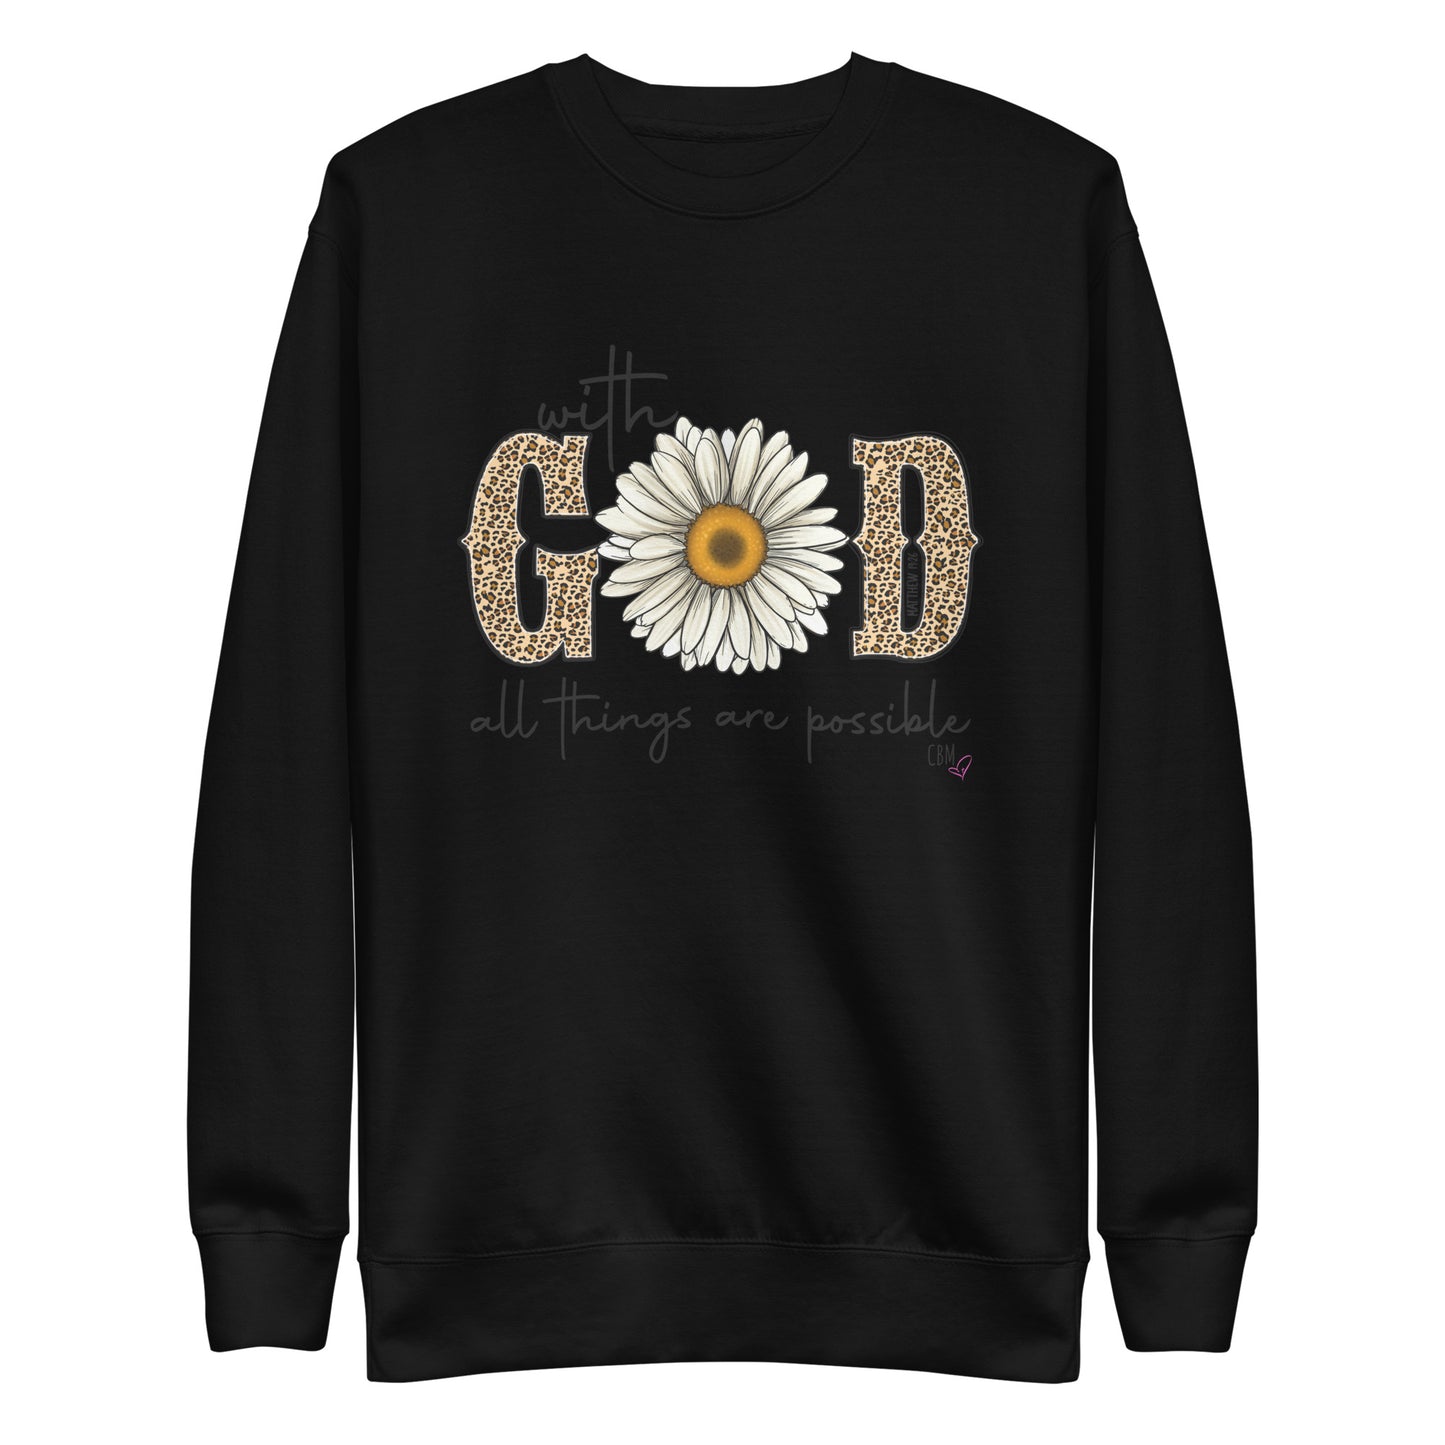 GOD Sunflower "All things are Possible" Premium Sweatshirt